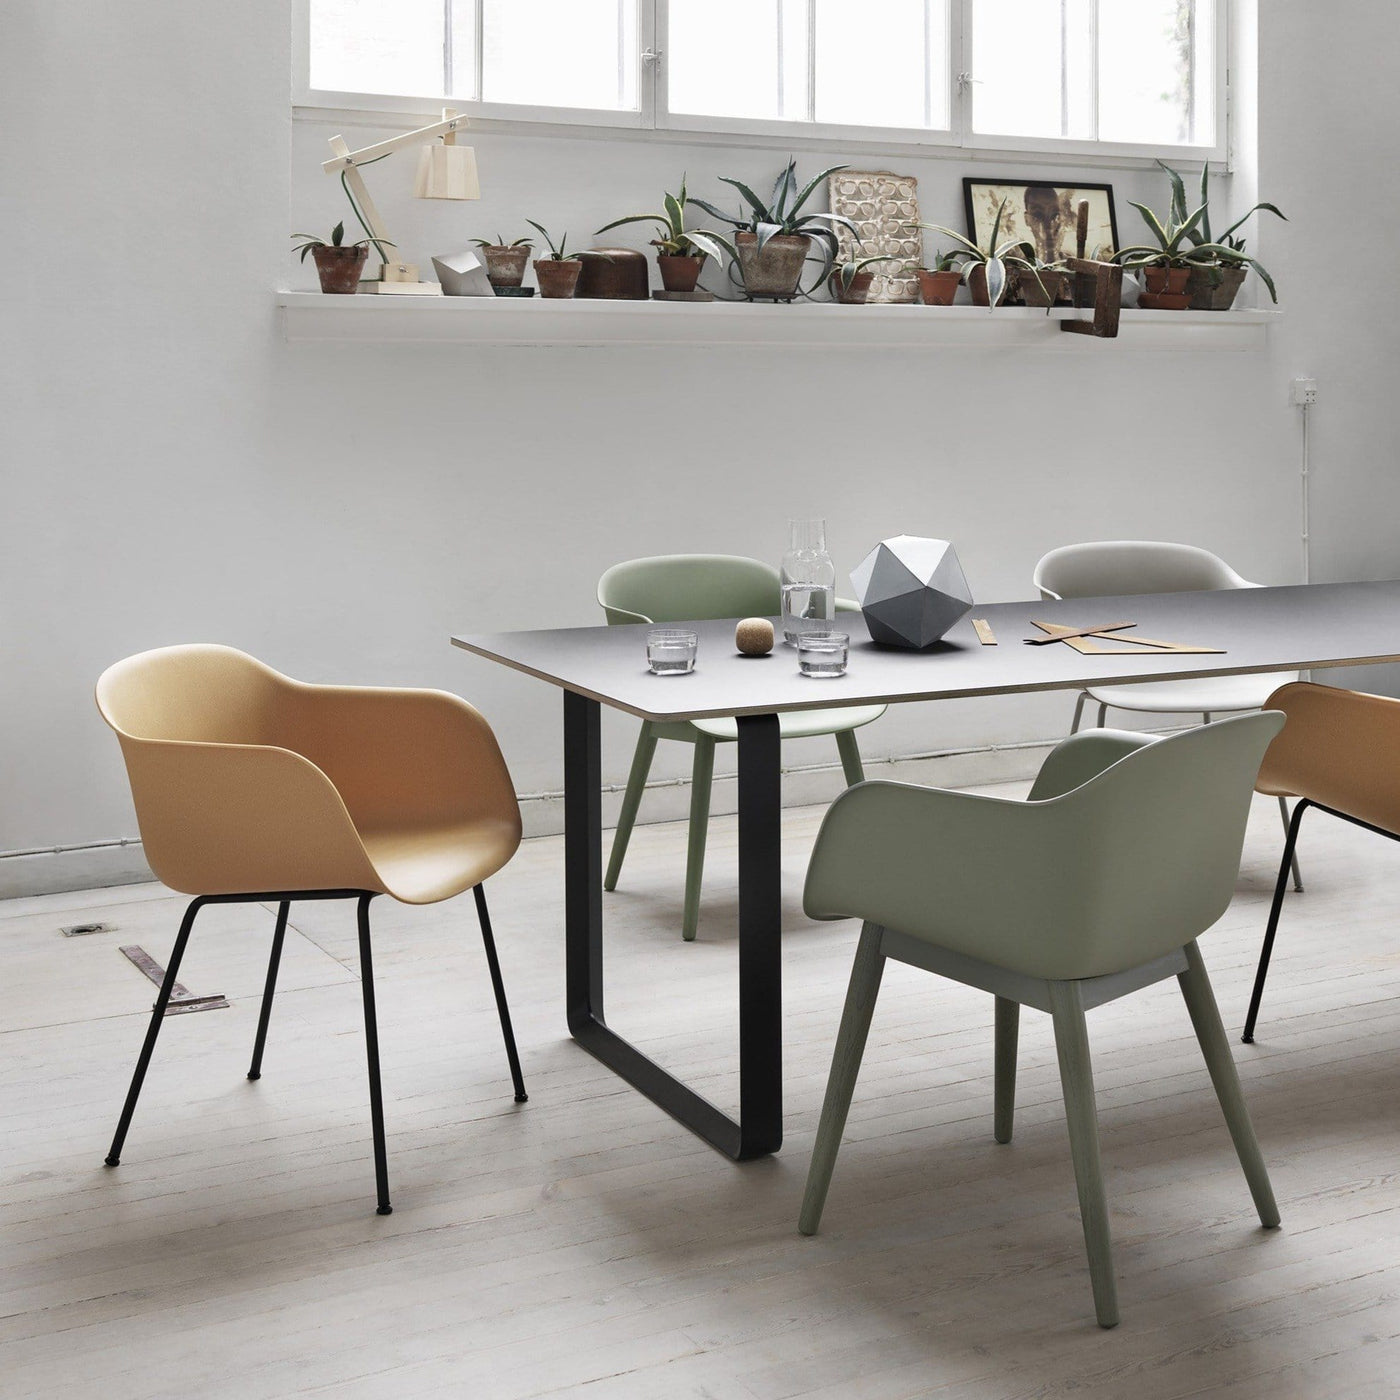 muuto fiber armchair tube base in a dining room setting, available at someday designs. #colour_ochre